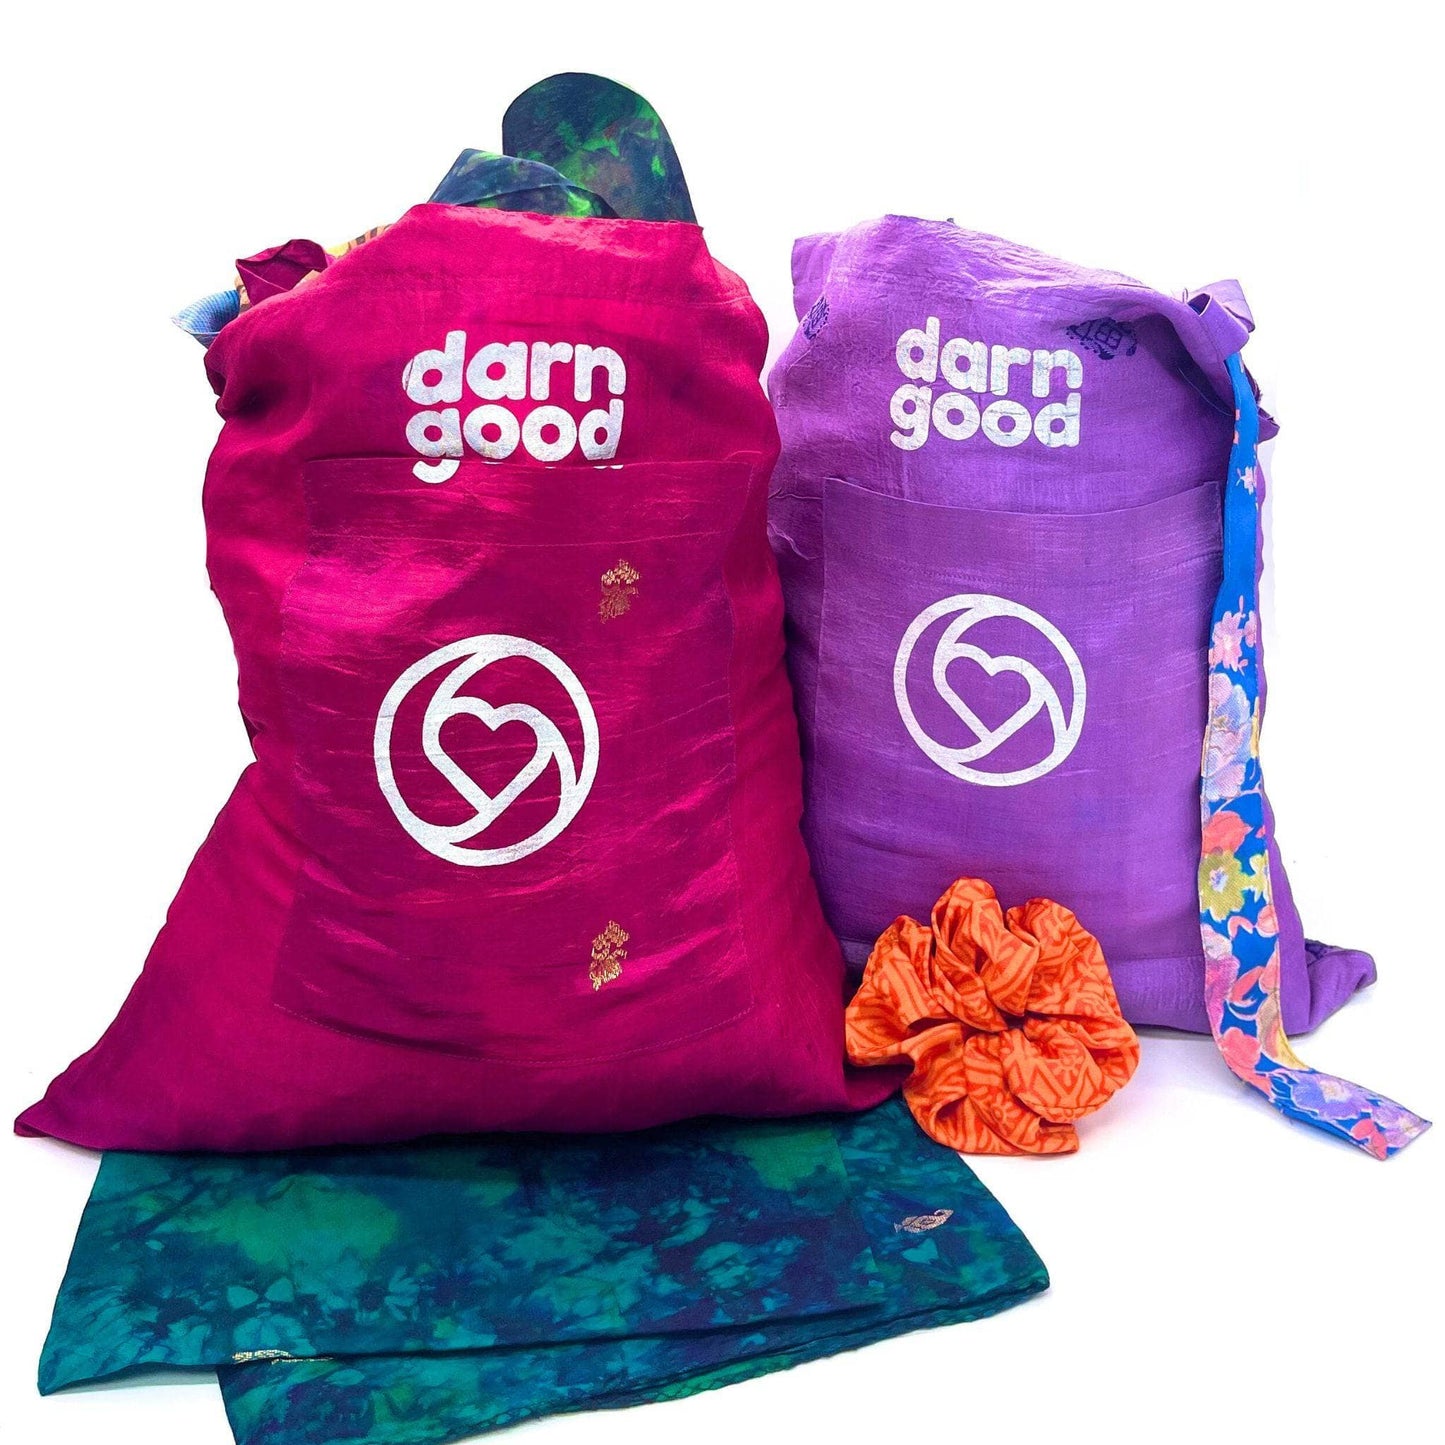 Two Sari Silk Reusable Tote Bags sitting on a white background. 